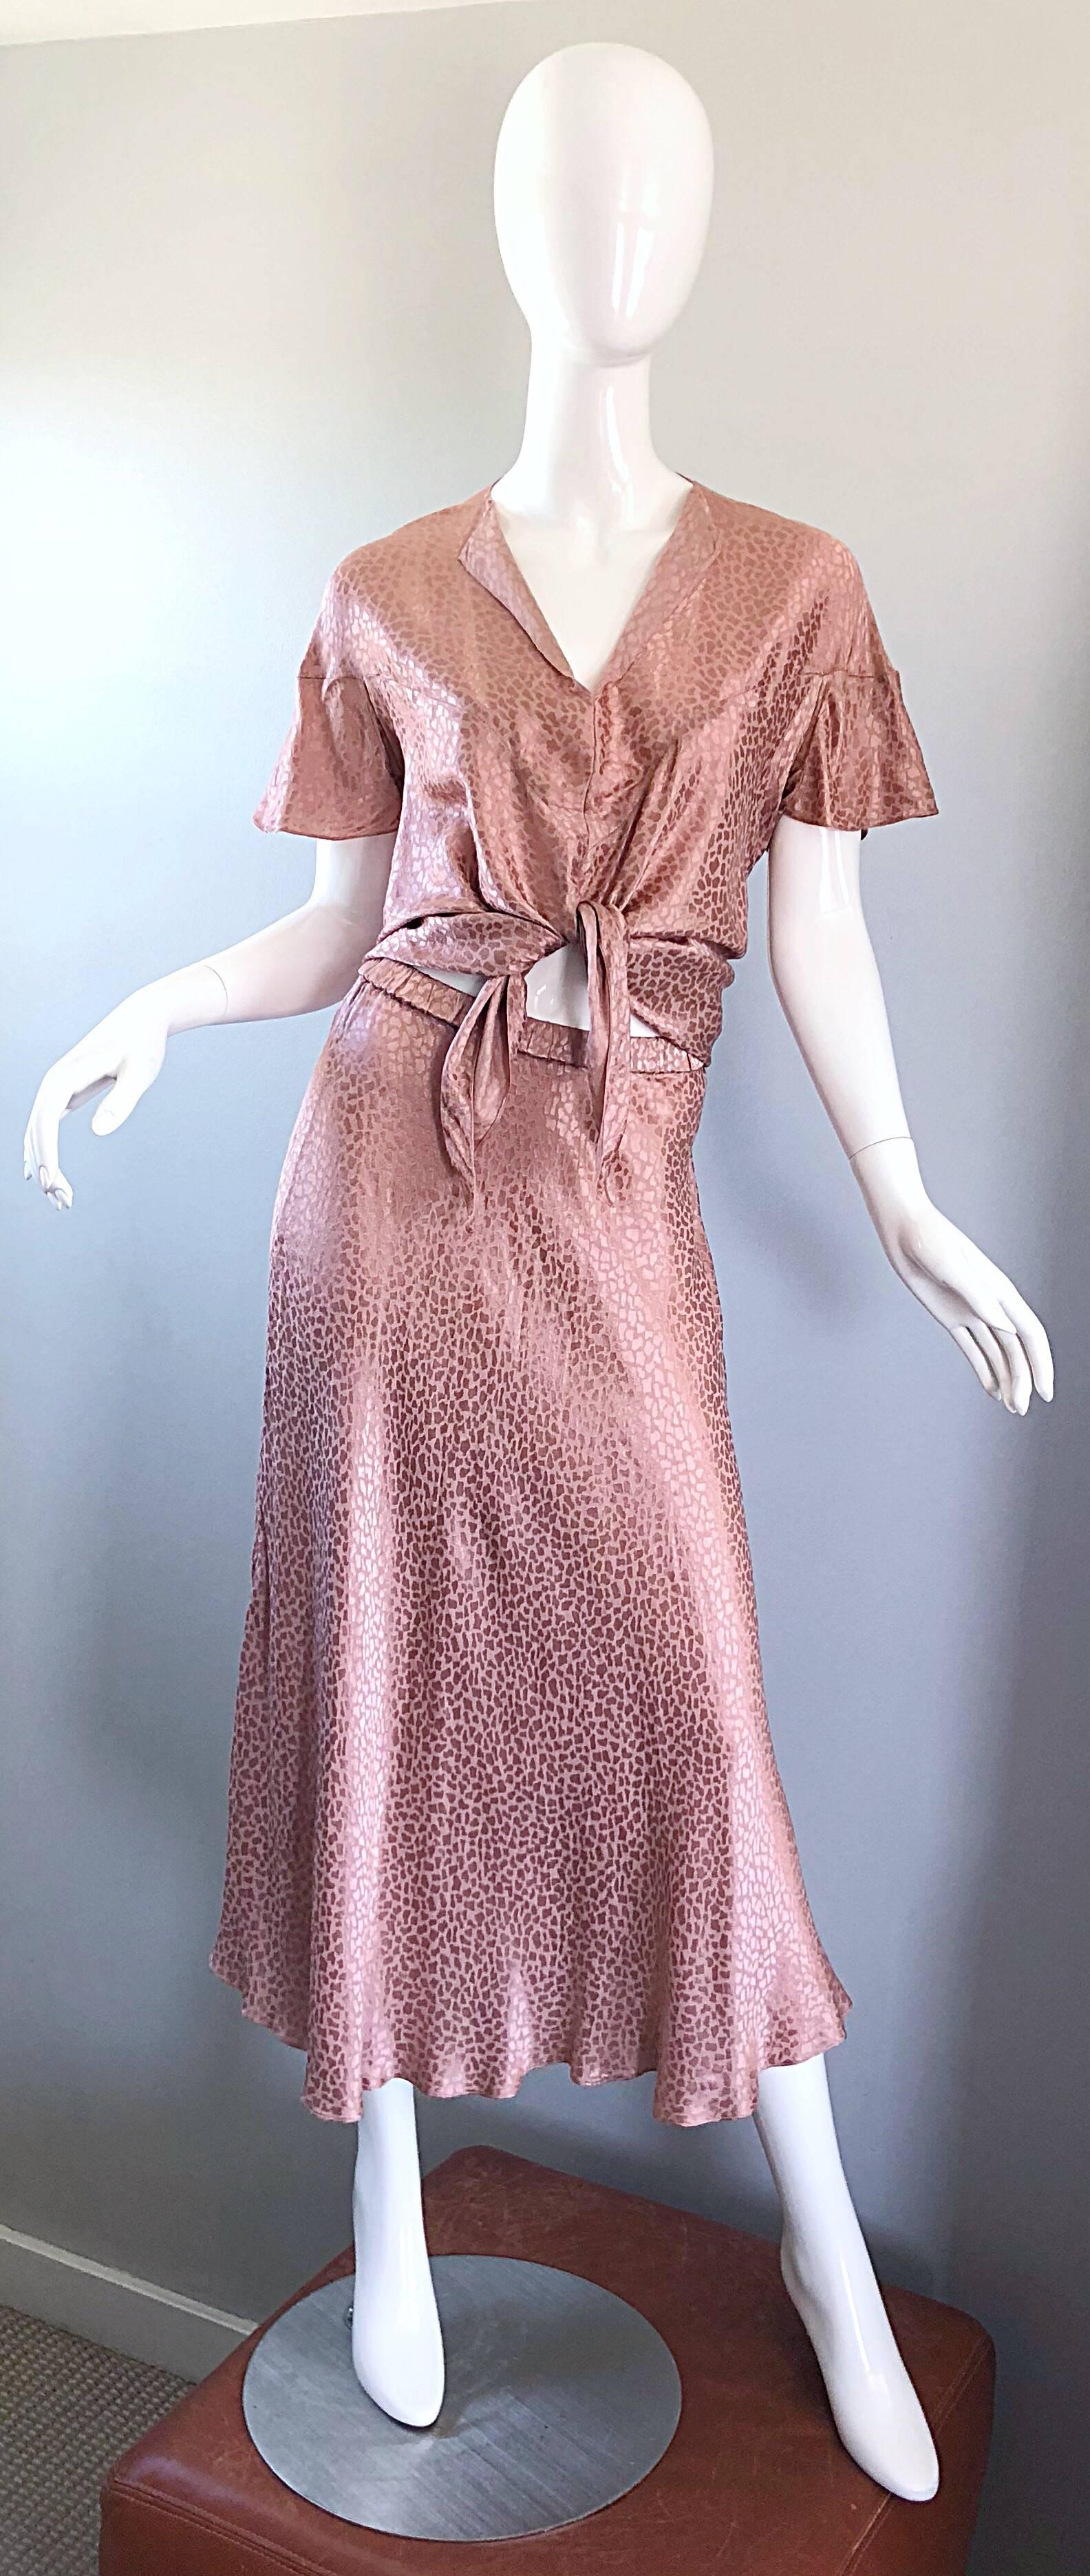 AMazing 1970s HOLLY'S HARP dusty rose / pink leopard animal print silk boho cropped top and skirt! Liquid silk looks amazing on! Ties shut at front center waist. Skirt features an elastic waist, and stretches to fit. Very well constructed with a